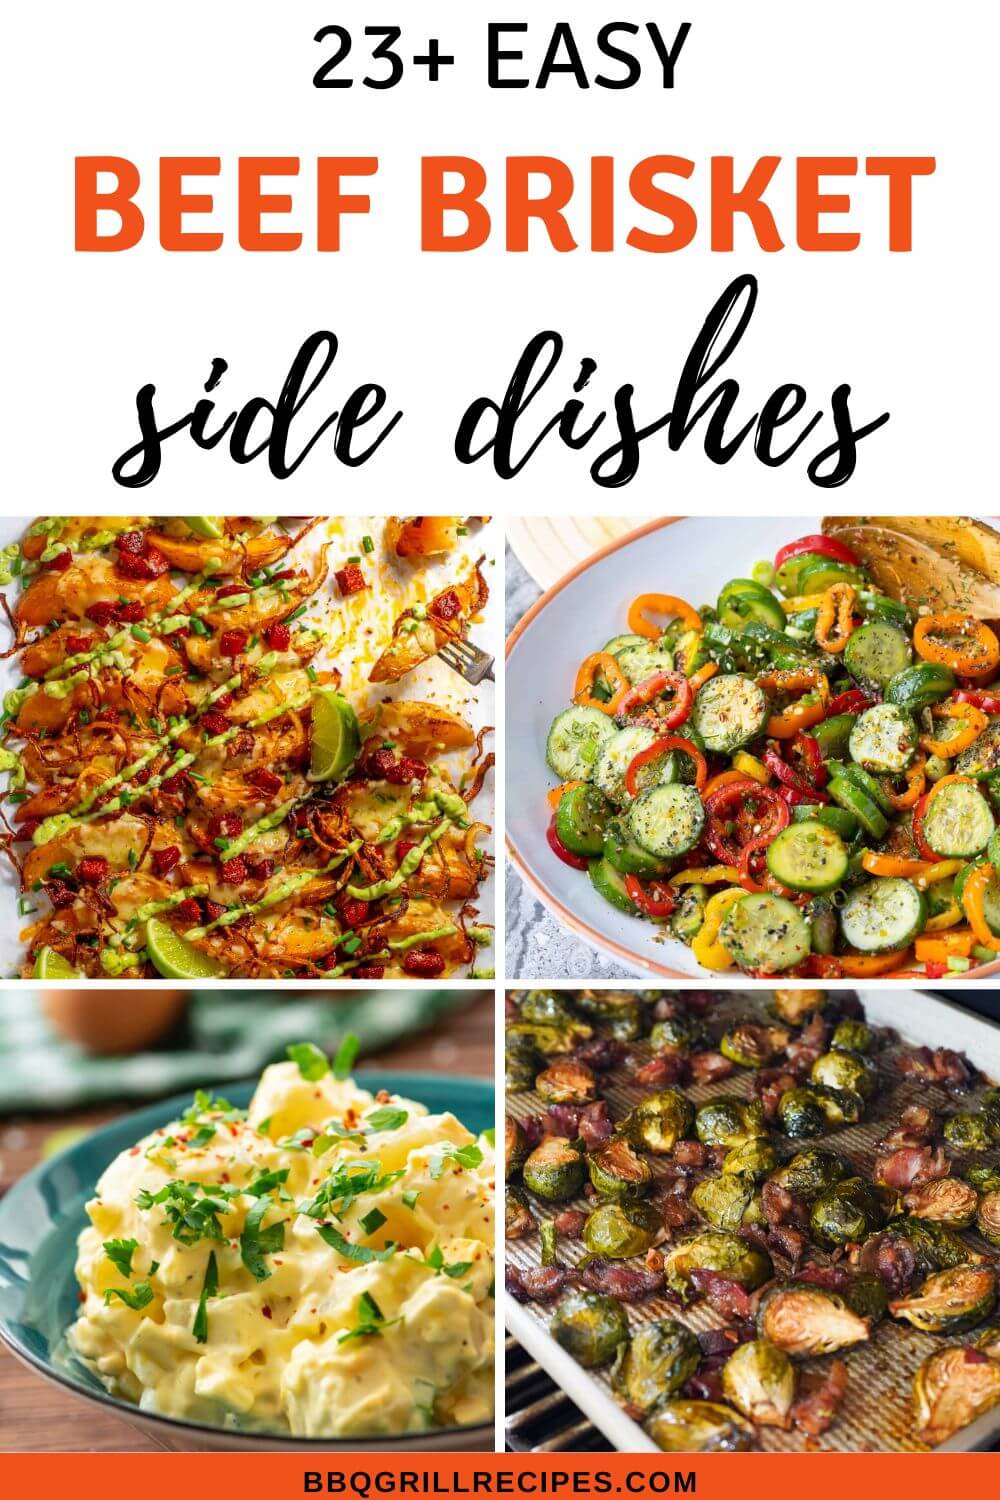 pinterest image - text reads 23+ easy beef brisket side dishes.